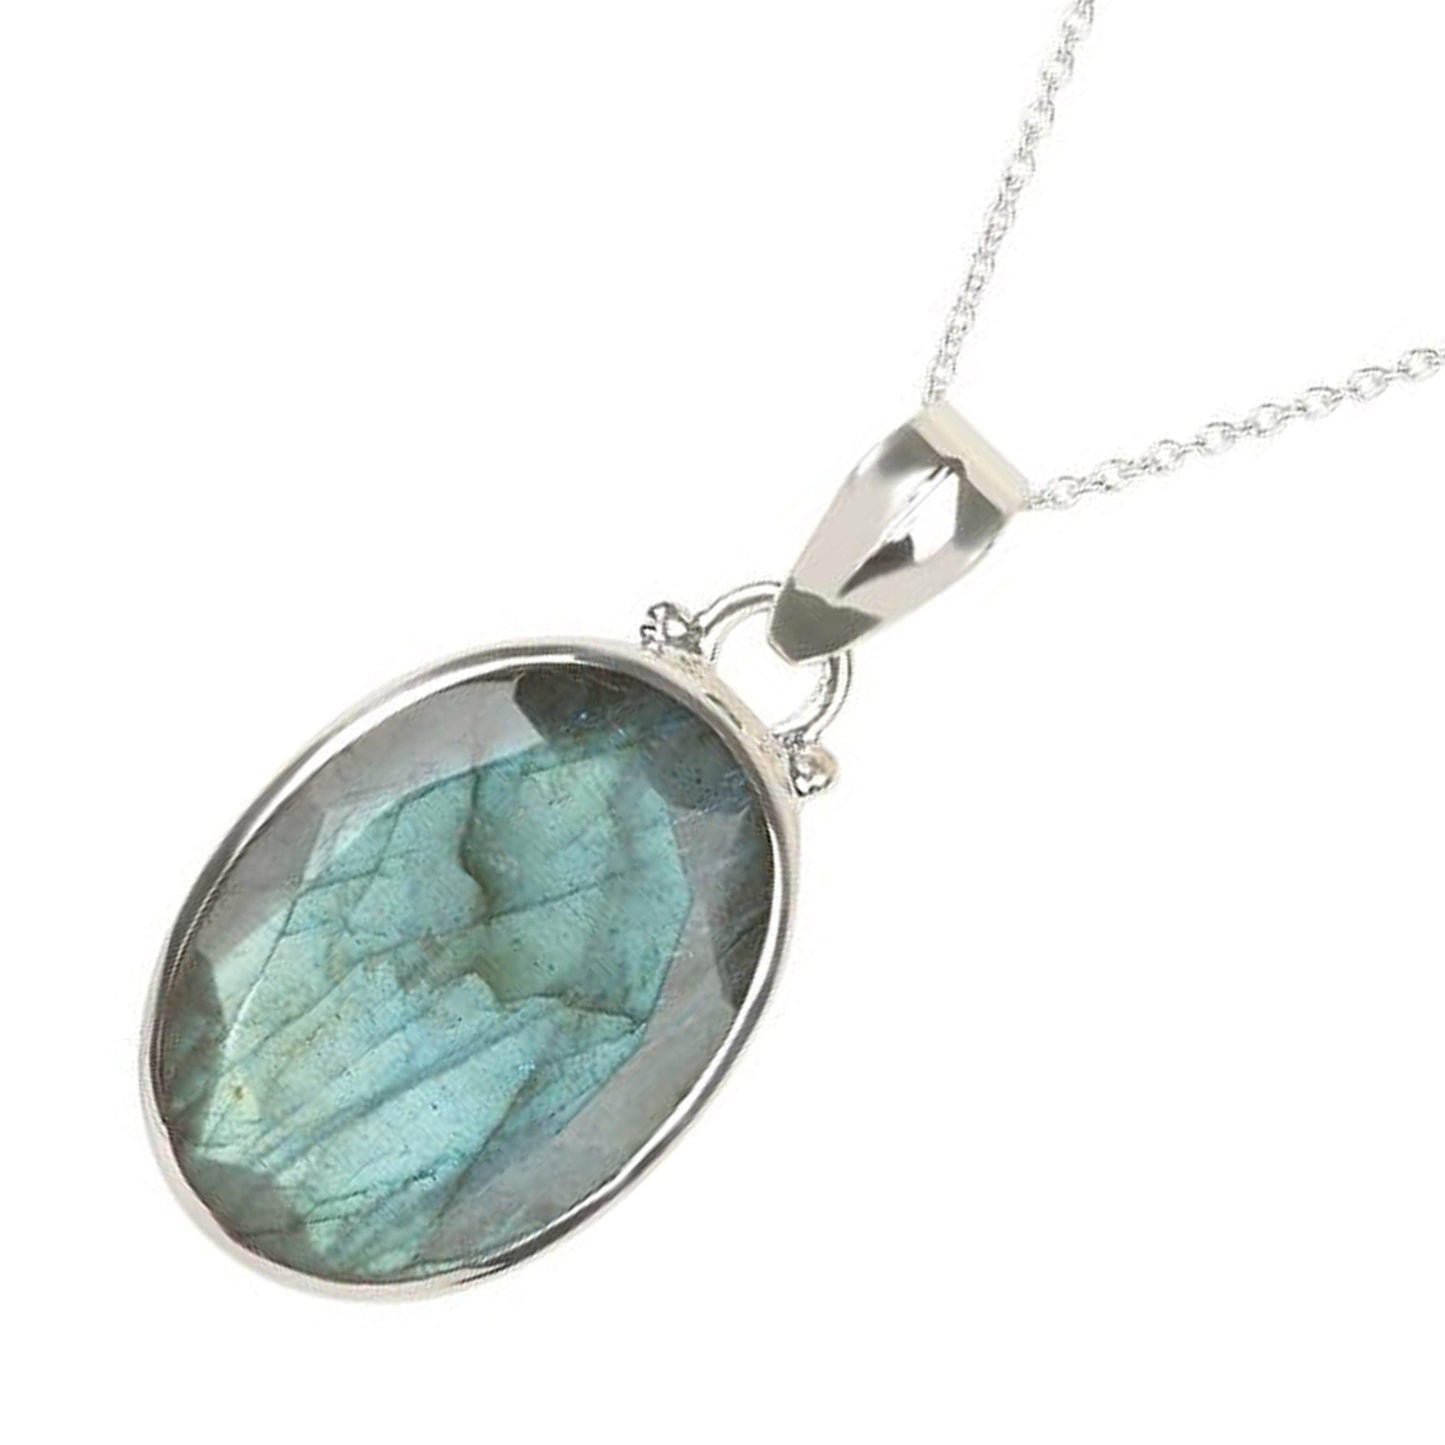 Natural Labradorite Gemstone Pendant 925 Sterling Silver Pendant, Pendant For Women, Pendant With 18" Chain, Fine Jewelry, Gift For Her